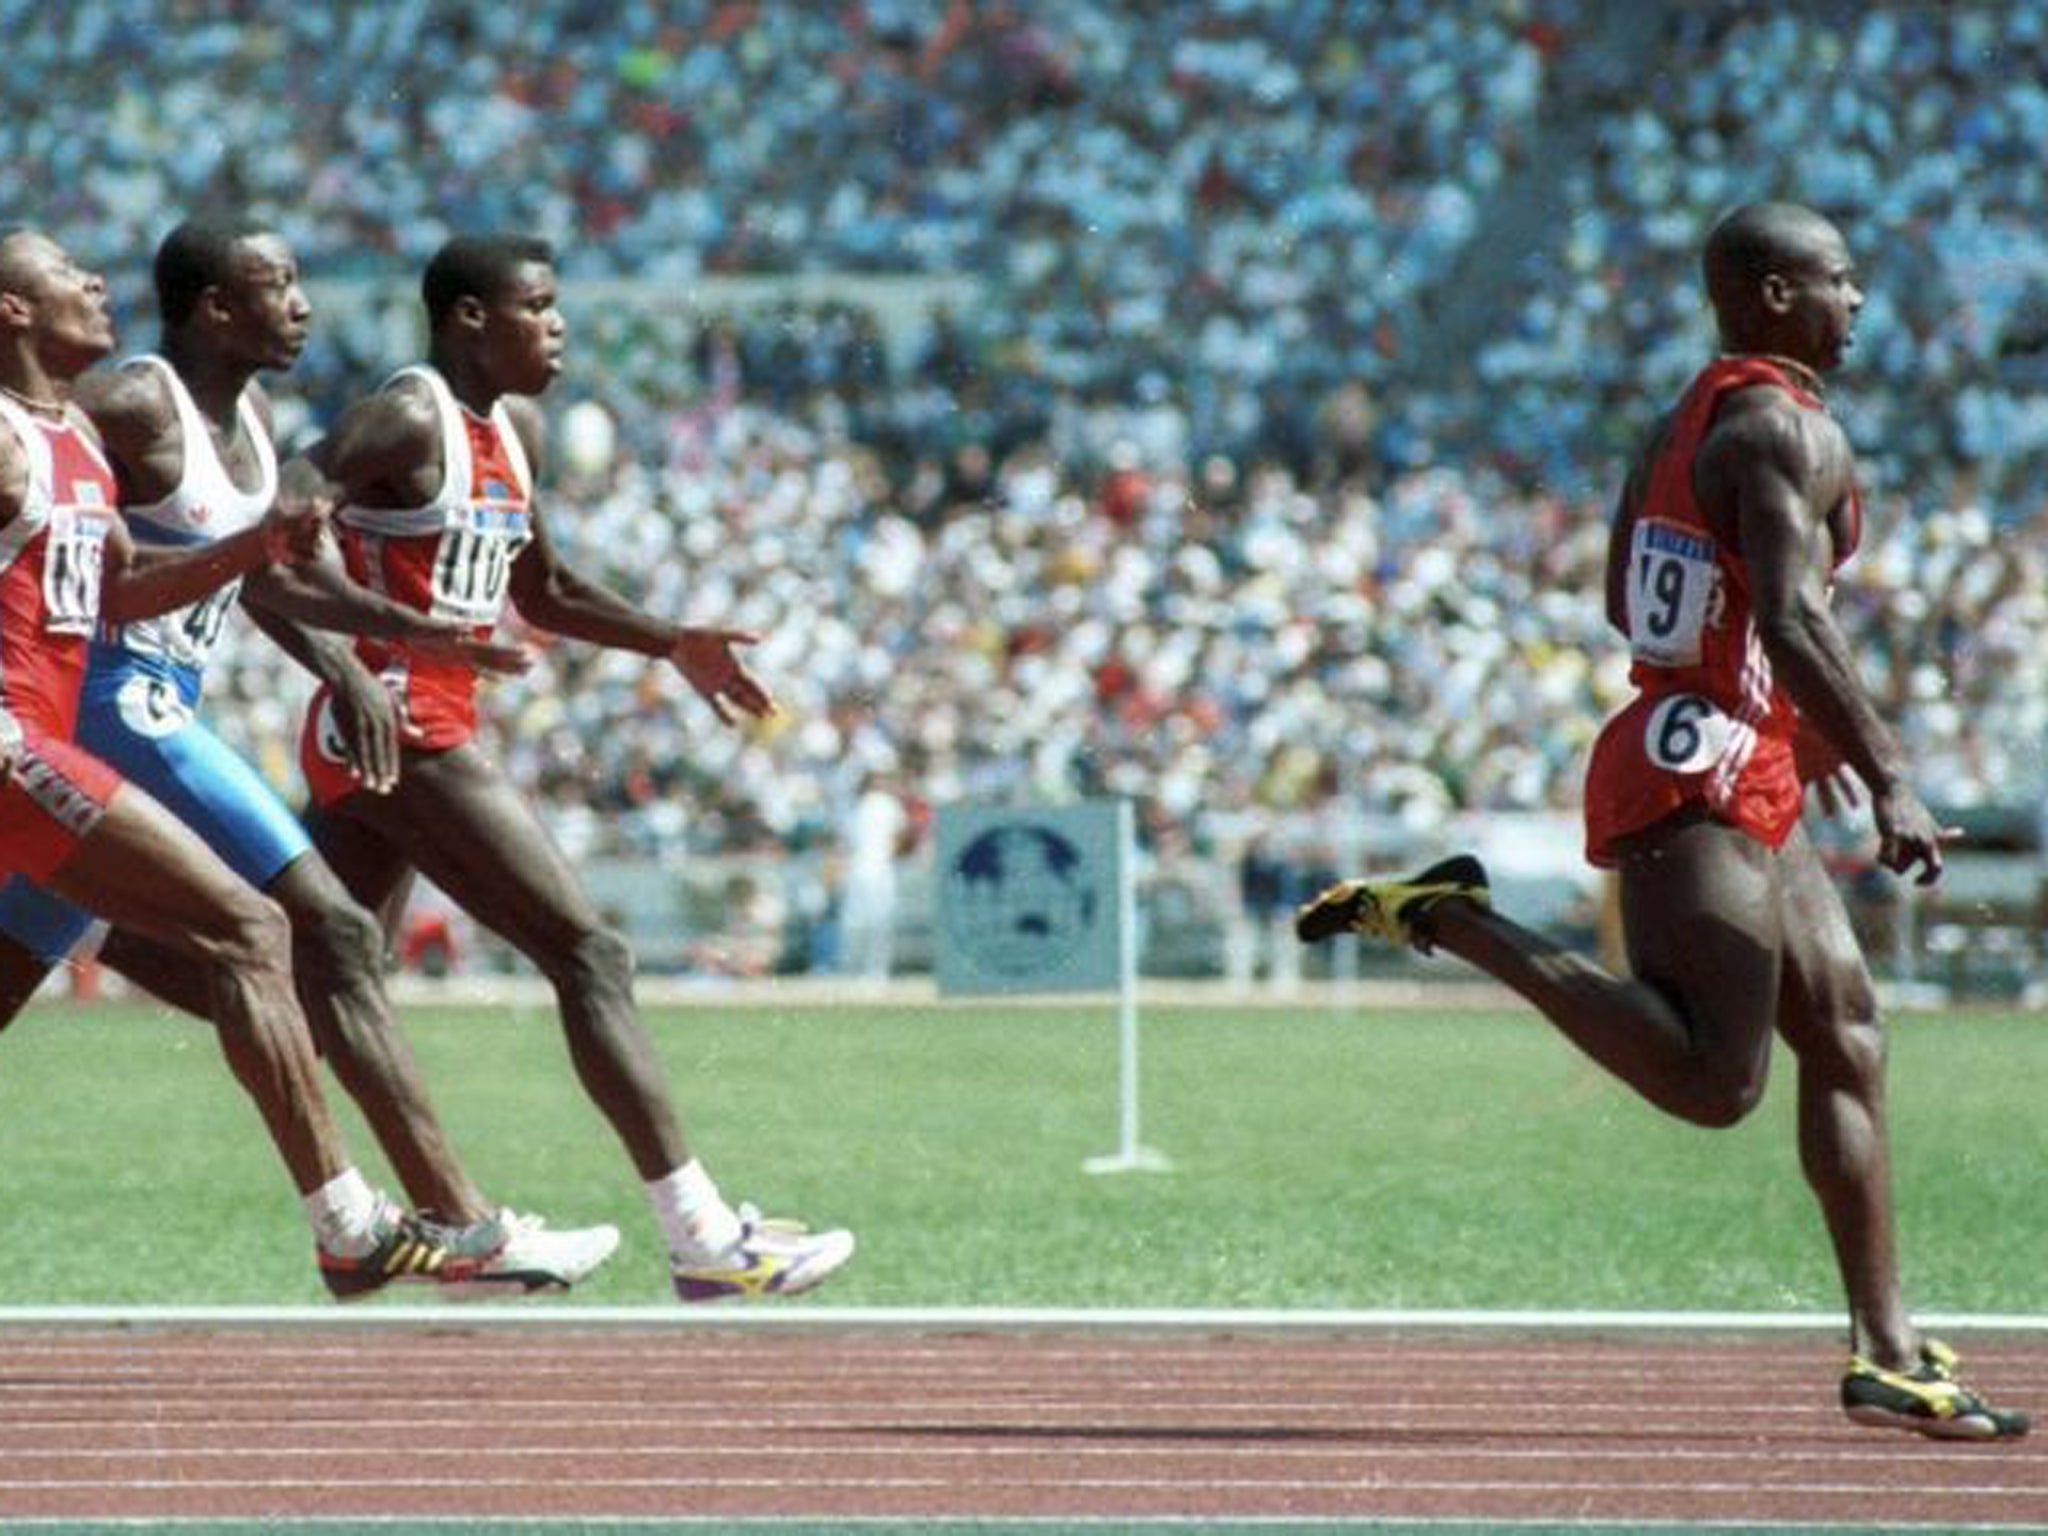 Injection of pace: Sprinter Ben Johnson wins the gold medal in the 100m sprint in Seoul in this September 1988